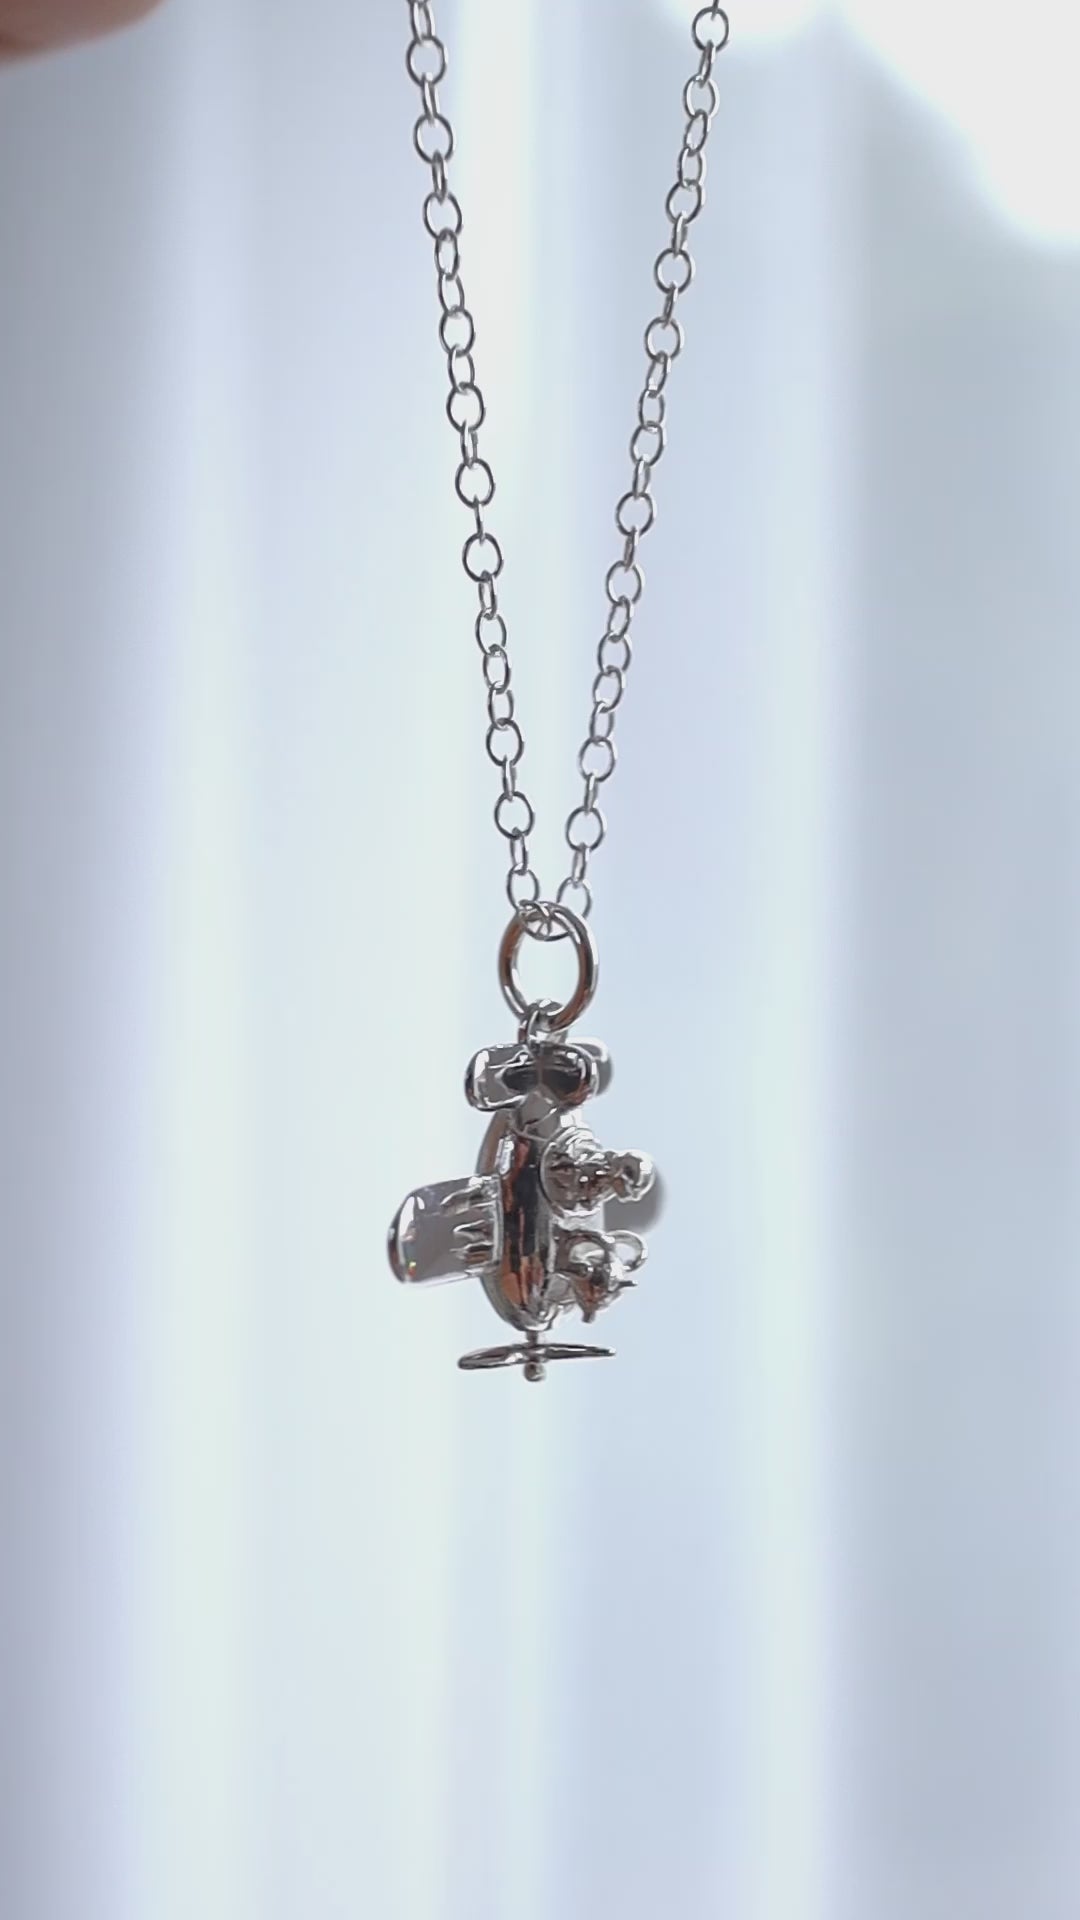 Gromit in a Plane Necklace (Sterling Silver)